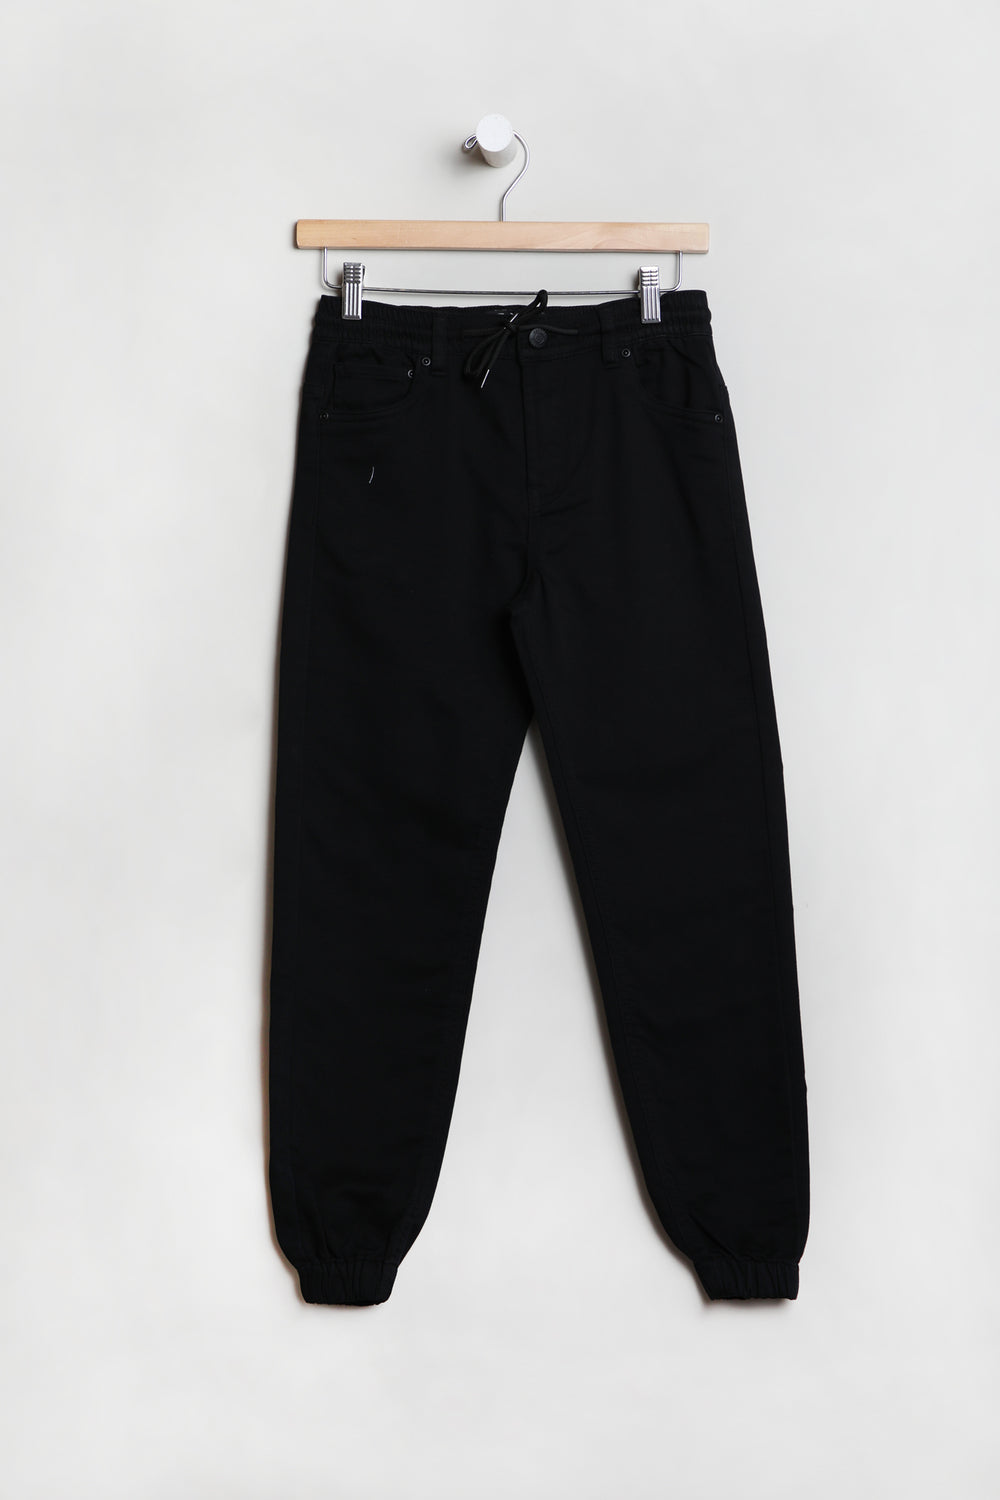 Zoo York Youth Soft Denim Relaxed Jogger Zoo York Youth Soft Denim Relaxed Jogger